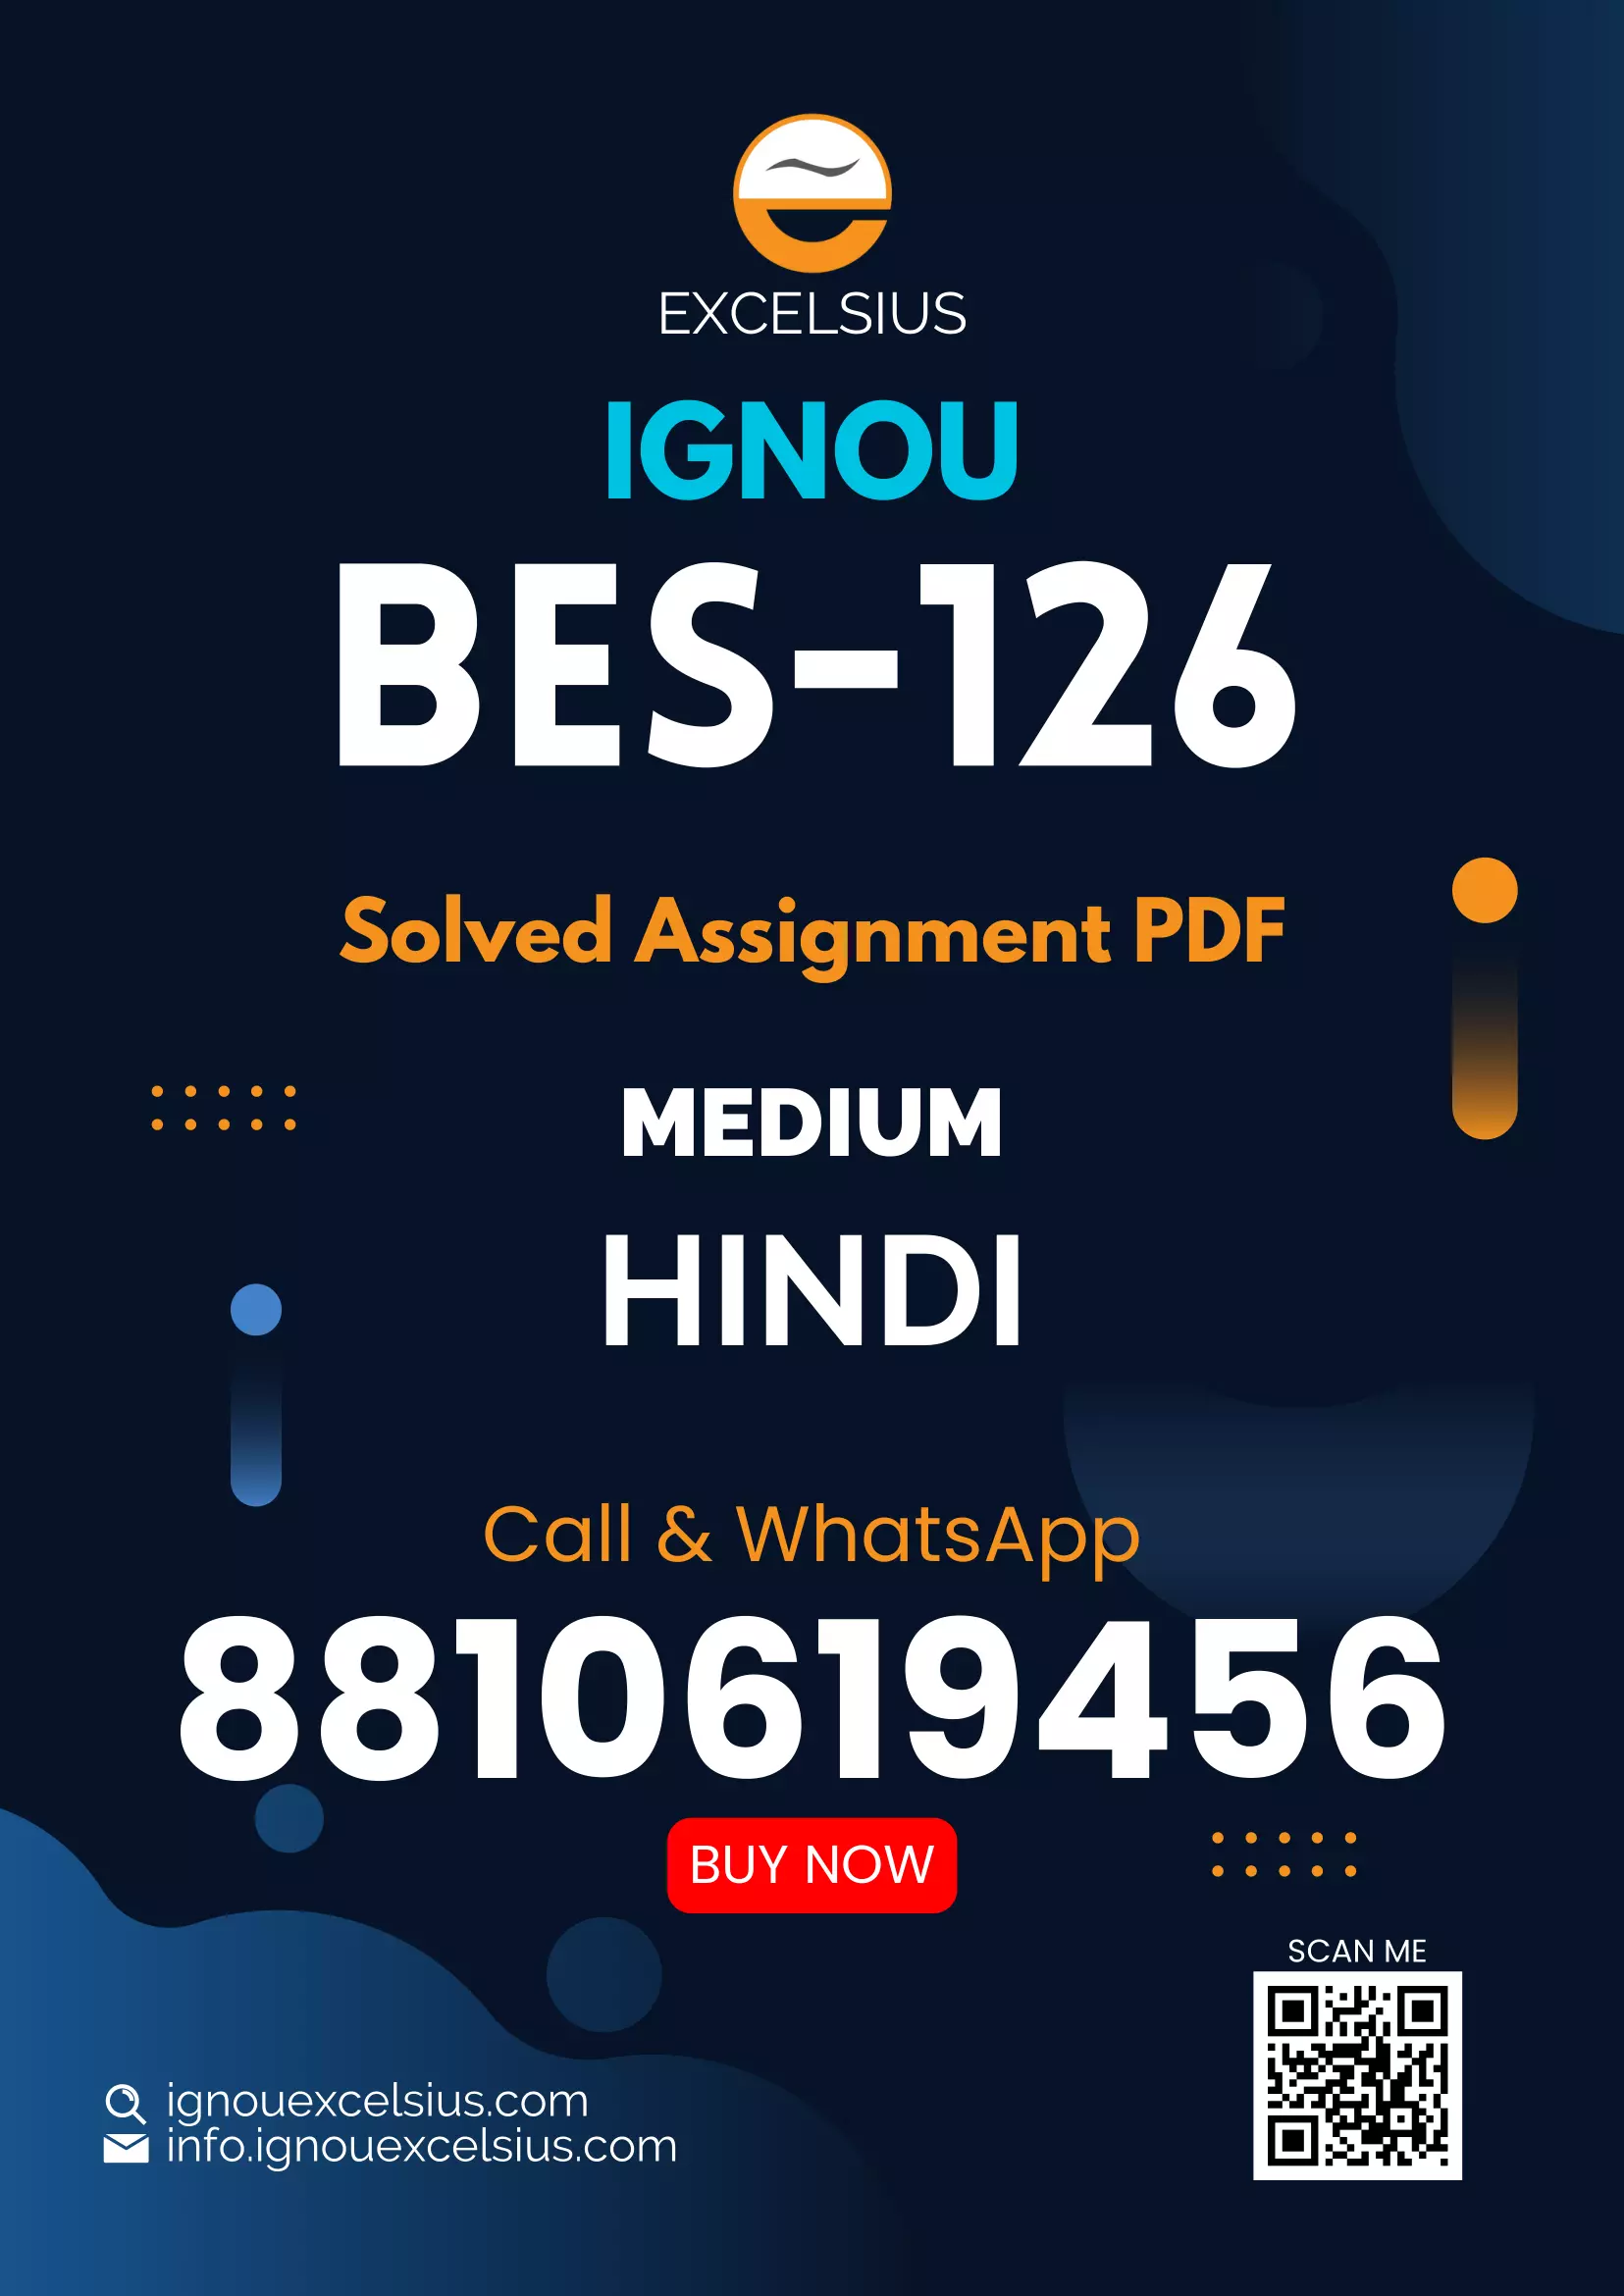 IGNOU BES-126 - Knowledge and Curriculum, Latest Solved Assignment-January 2022